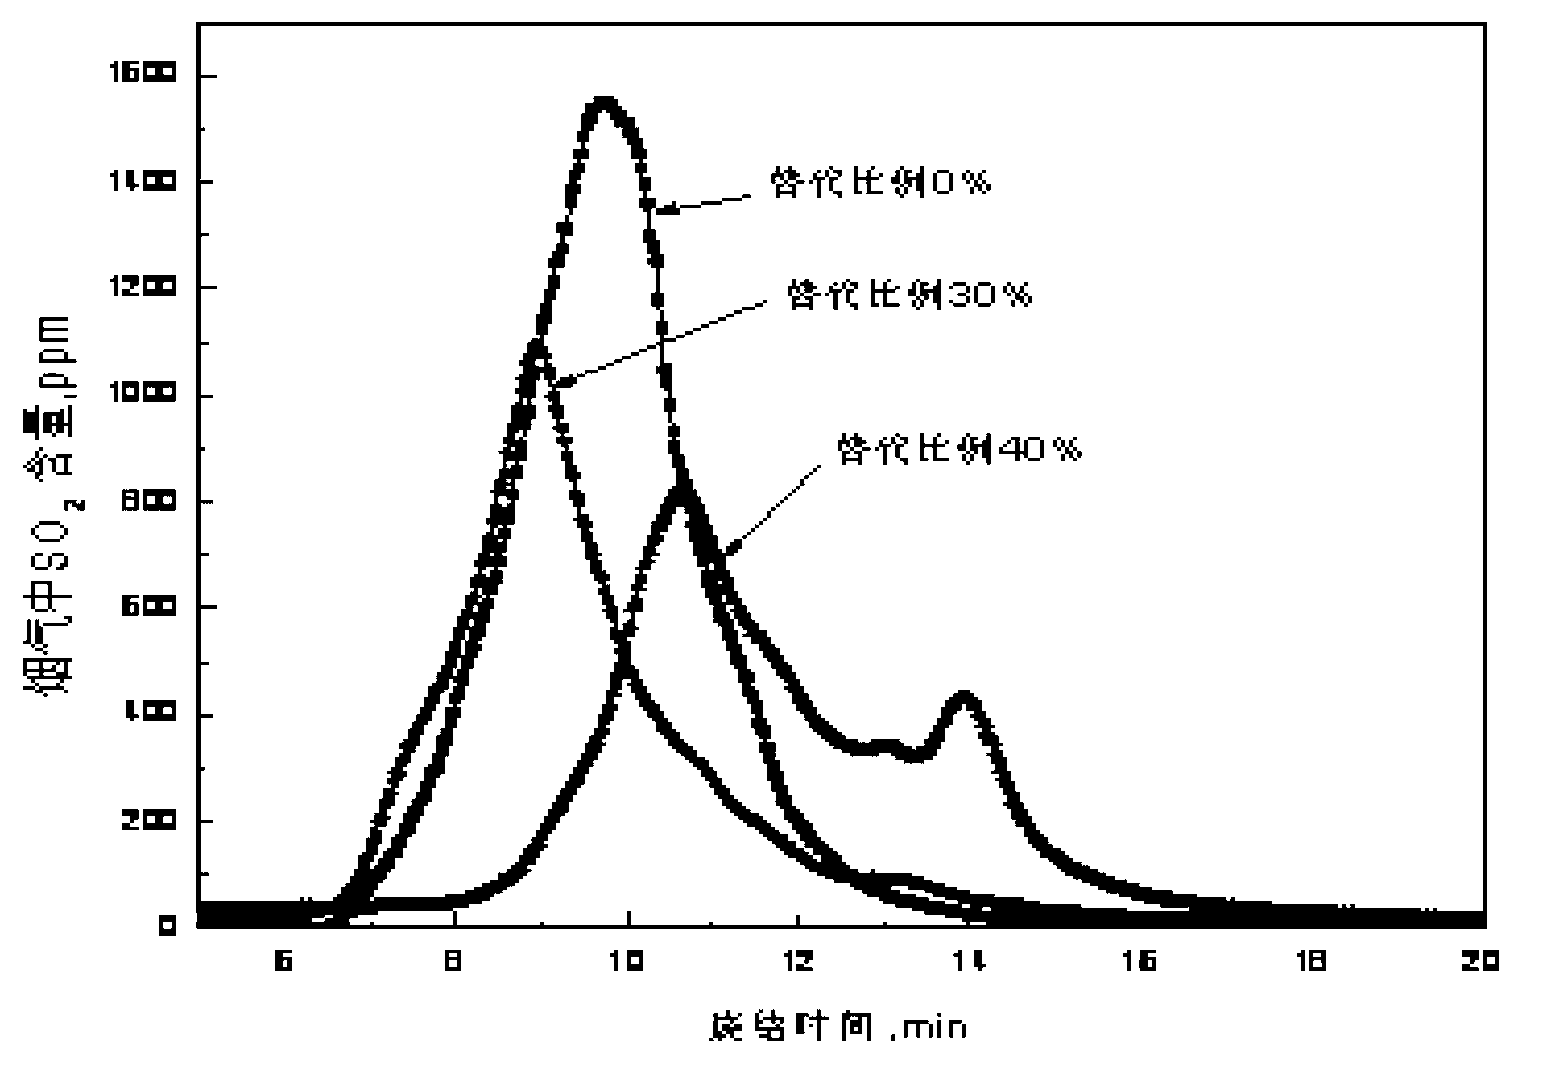 Method for energy conservation and emission reduction of manganese mineral powder sintering